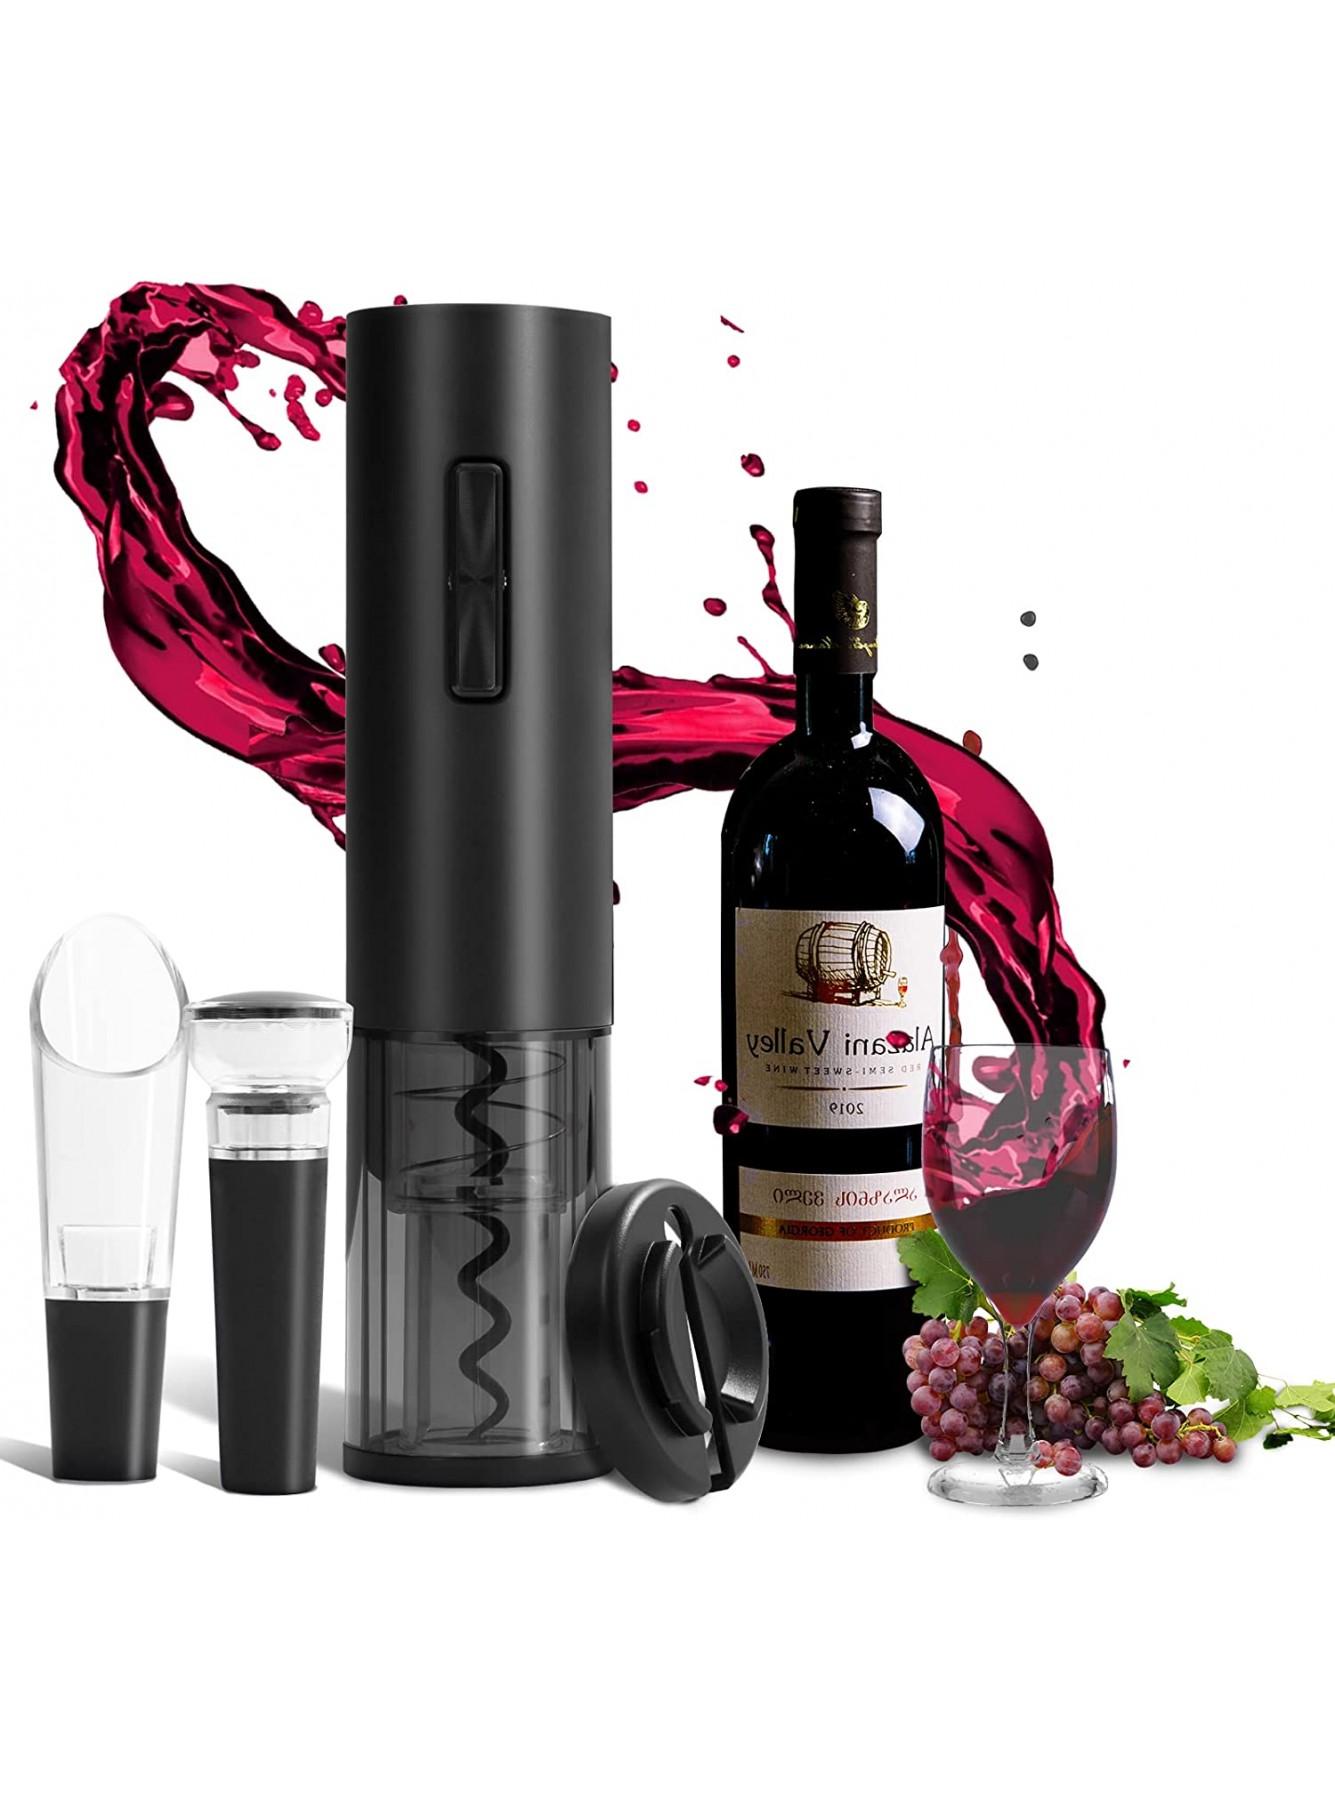 Dorylo Electric Wine Bottle Openers Set Rechargeable Automatic Corkscrew Opener Puller Electronic Wine Opener Set Electric Corkscrew Set Black Electric Wine Opener B09JWLB8QN